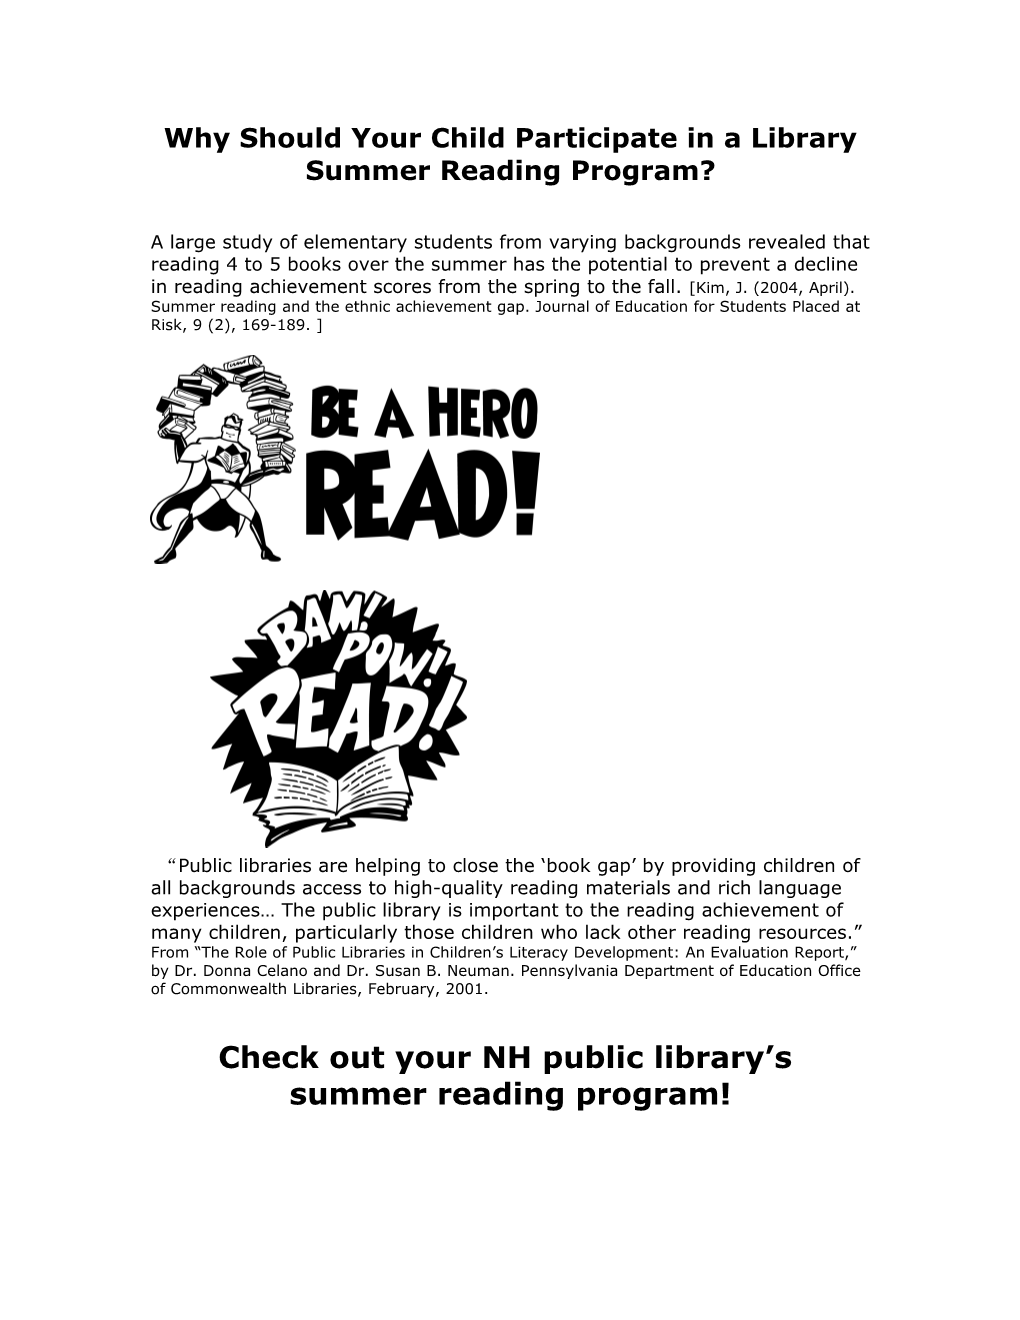 Why Should Your Child Participate in a Library Summer Reading Program?